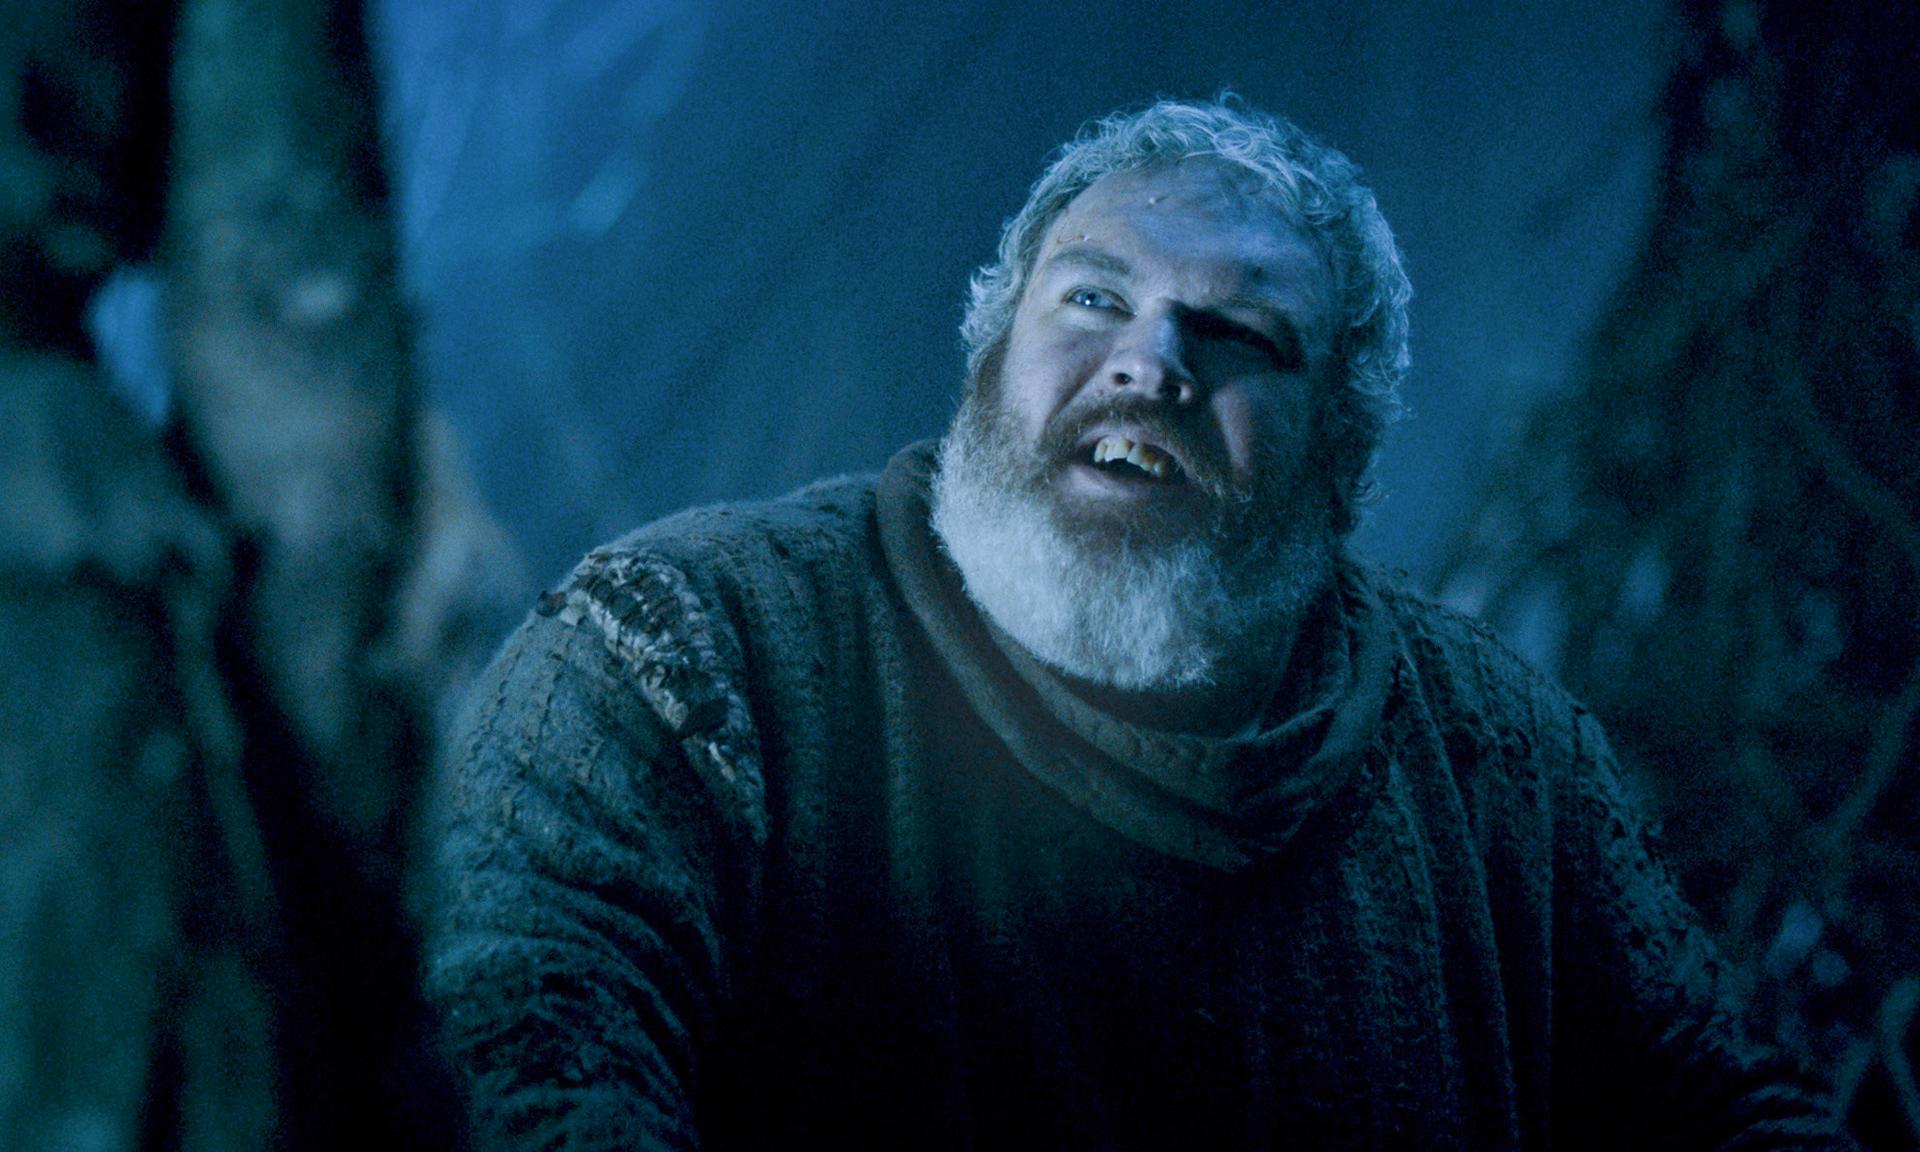 Hodor from “Game of Thrones”